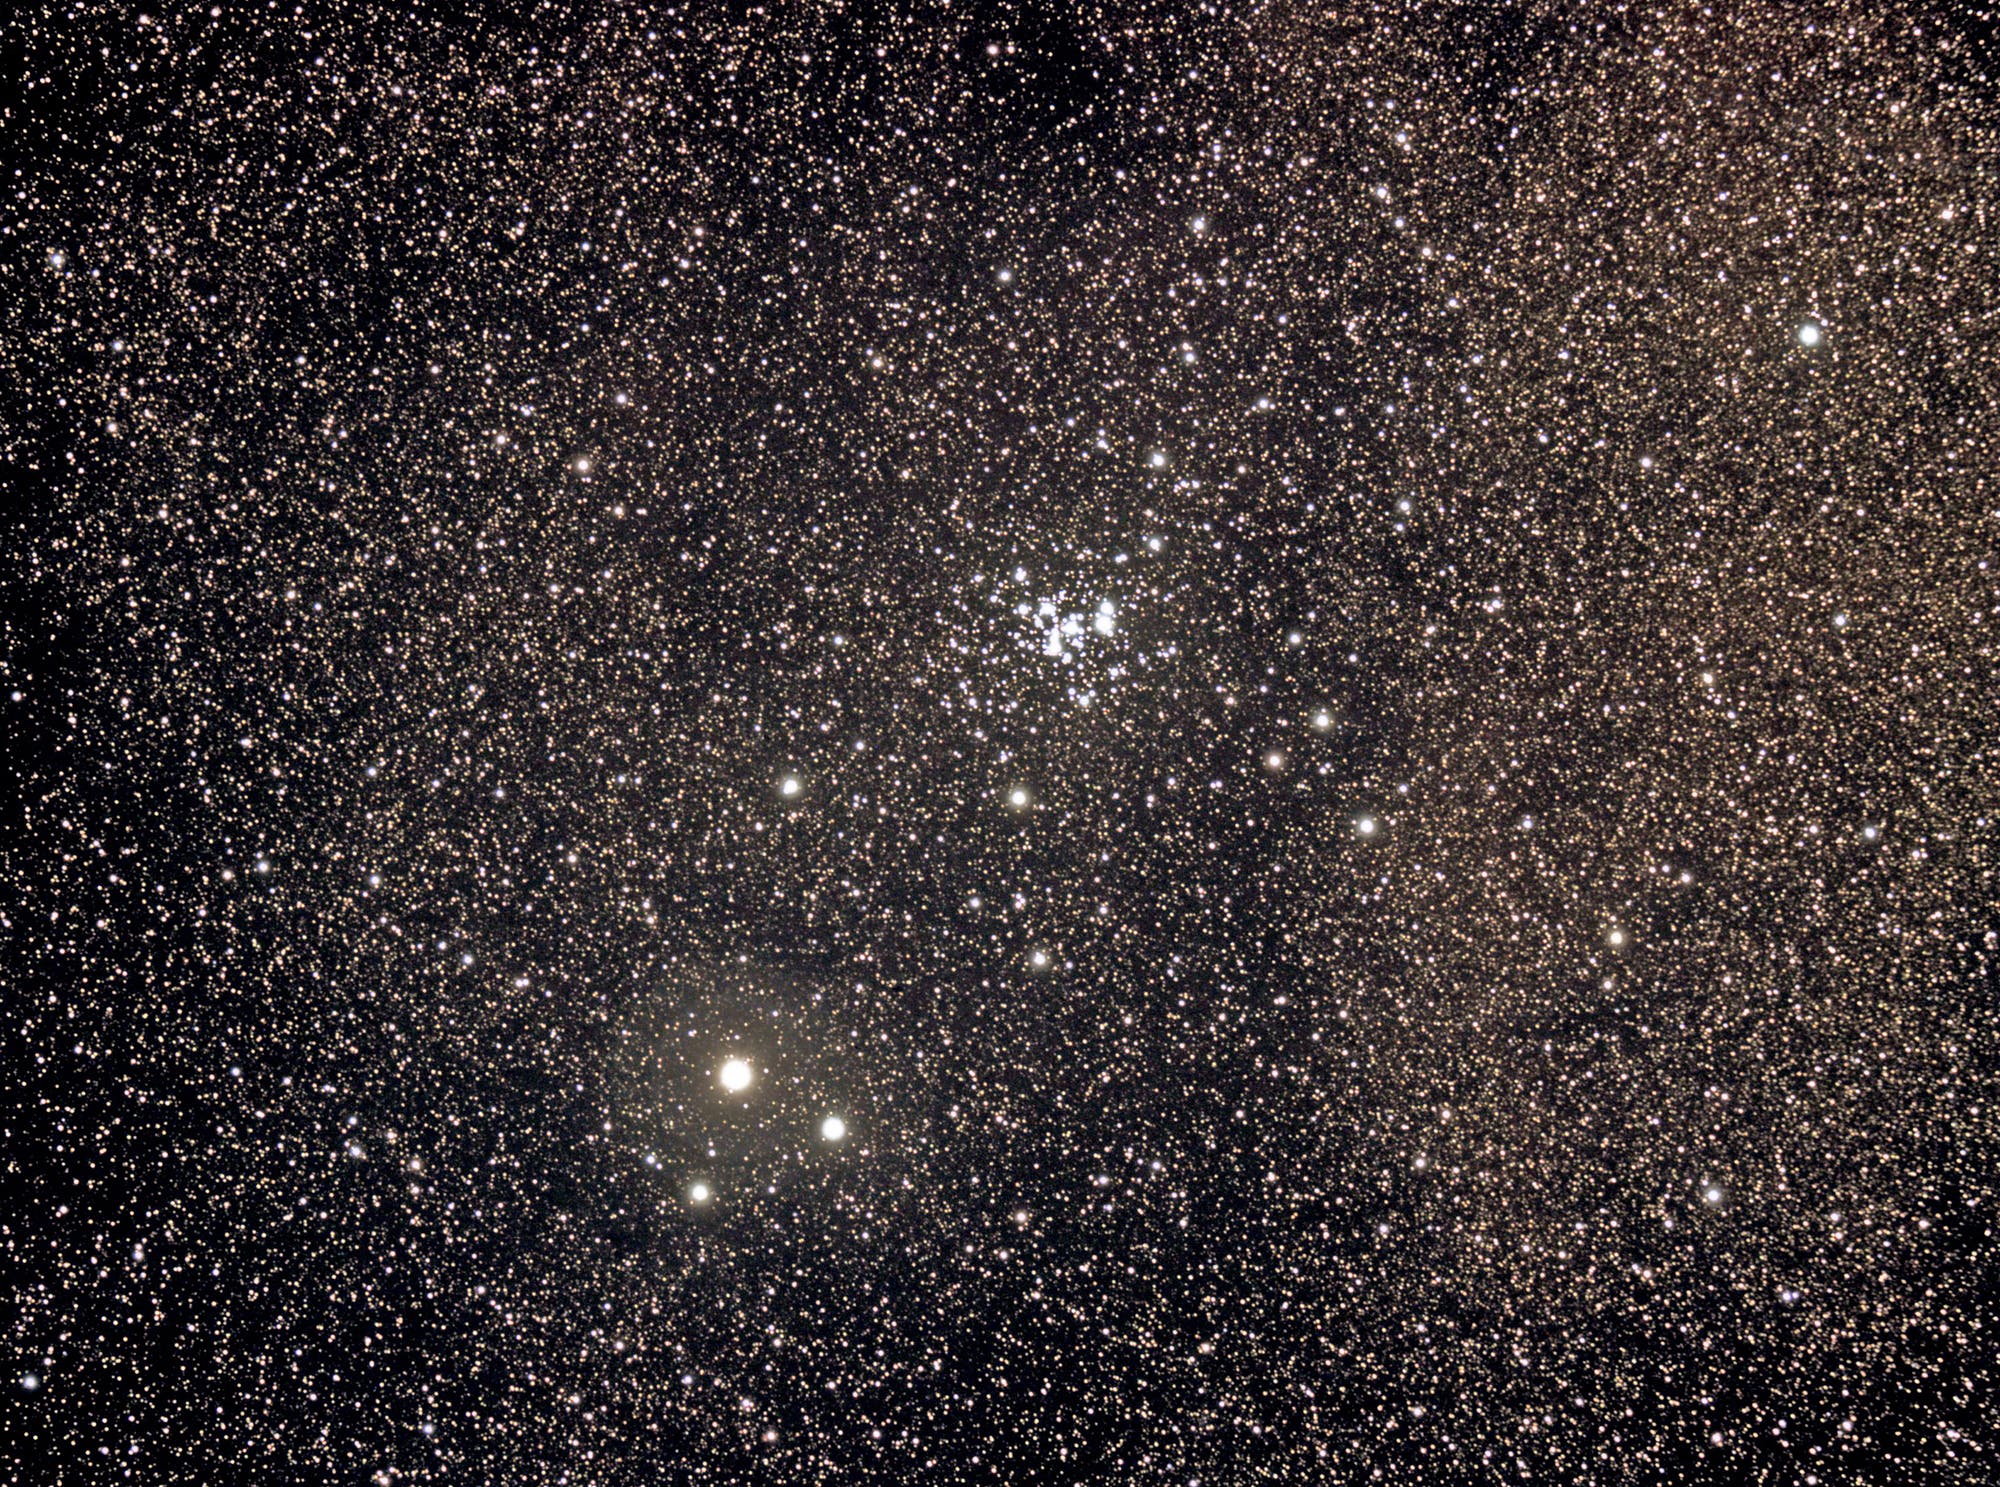 NGC 6231 "Table of Scorpius"